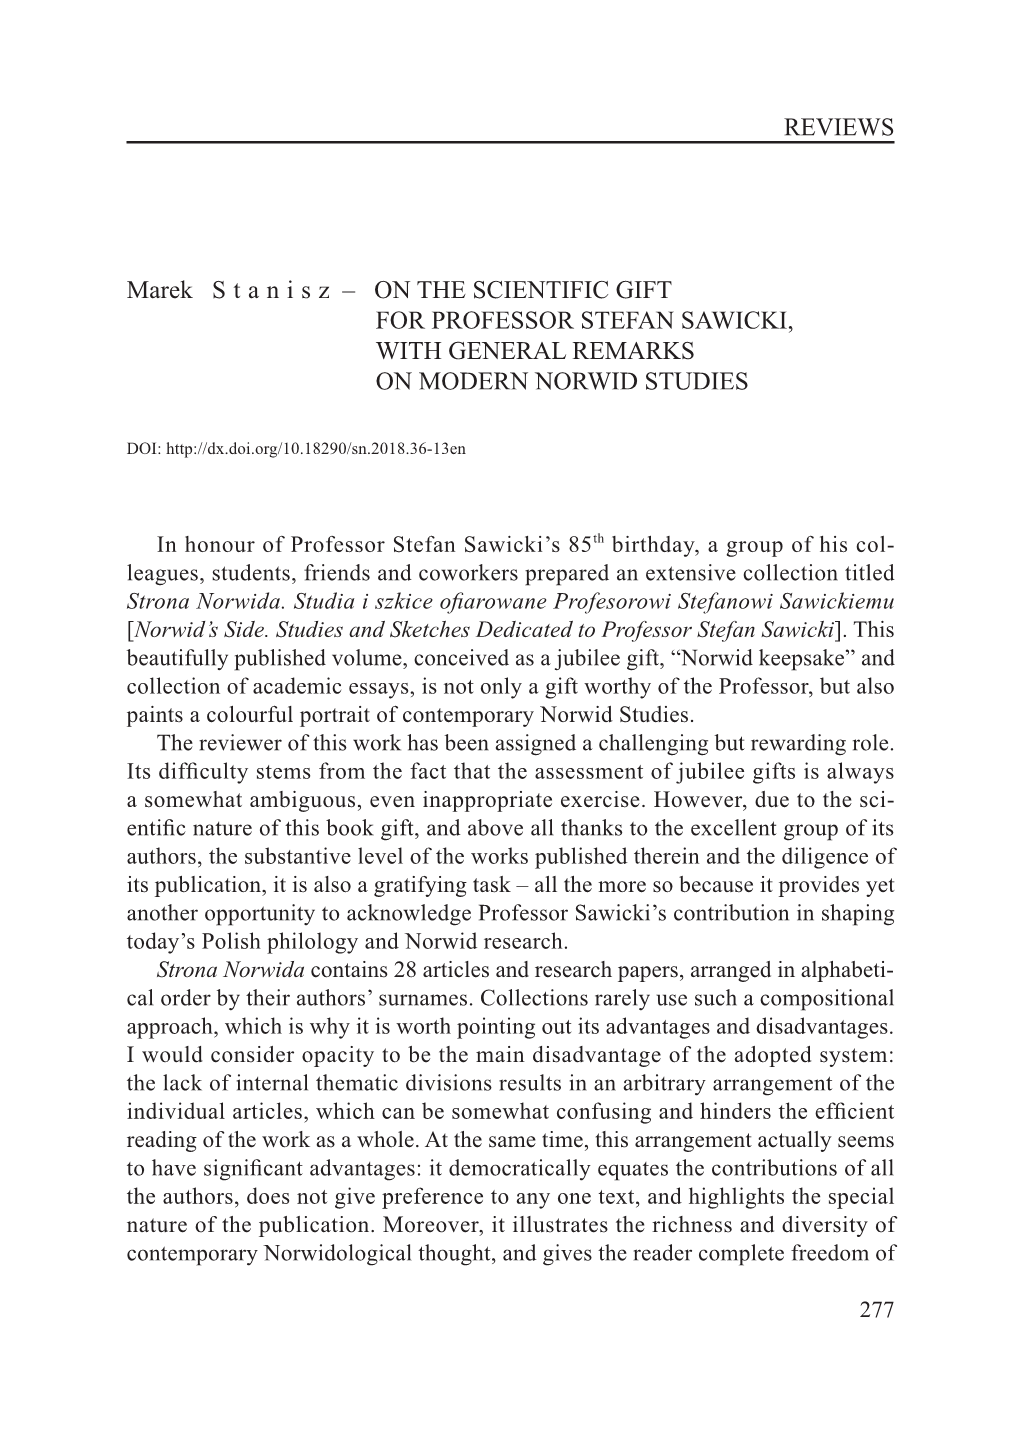 On the Scientific Gift for Professor Stefan Sawicki, with General Remarks on Modern Norwid Studies